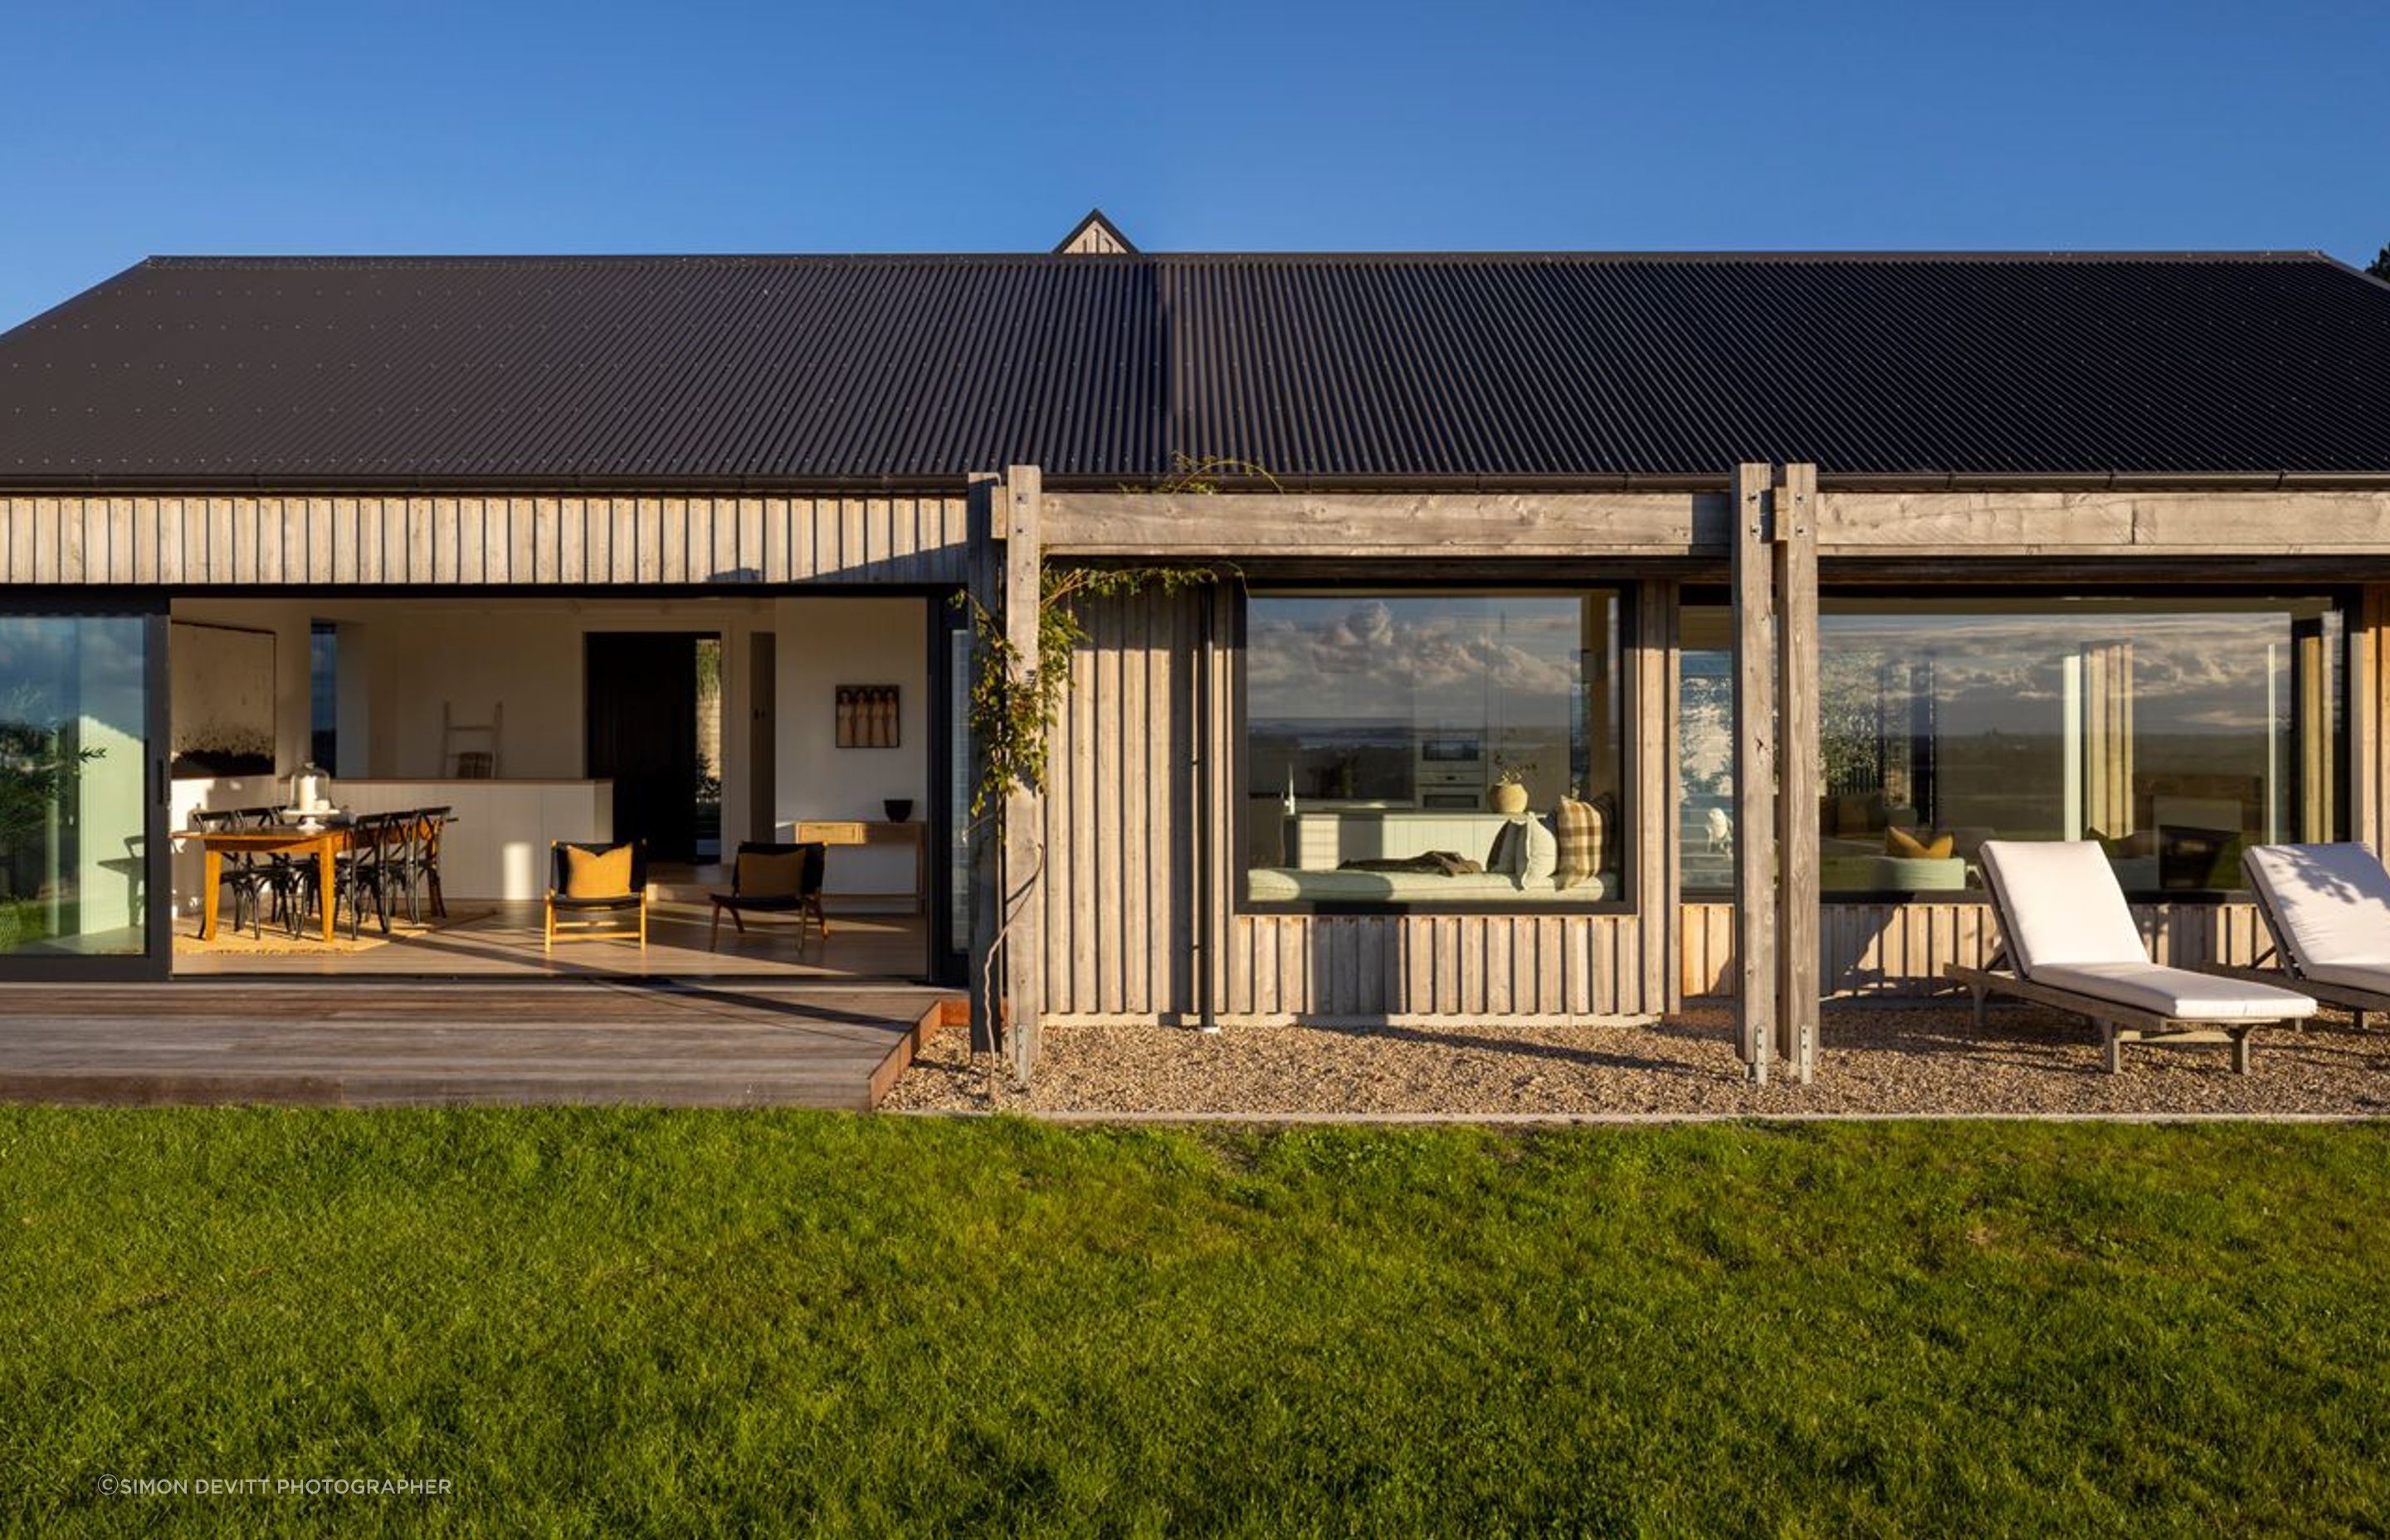 A view of the living spaces from the front lawn; the board and batten cladding is in cypress hardwood, which has a rustic yet refined aesthetic.